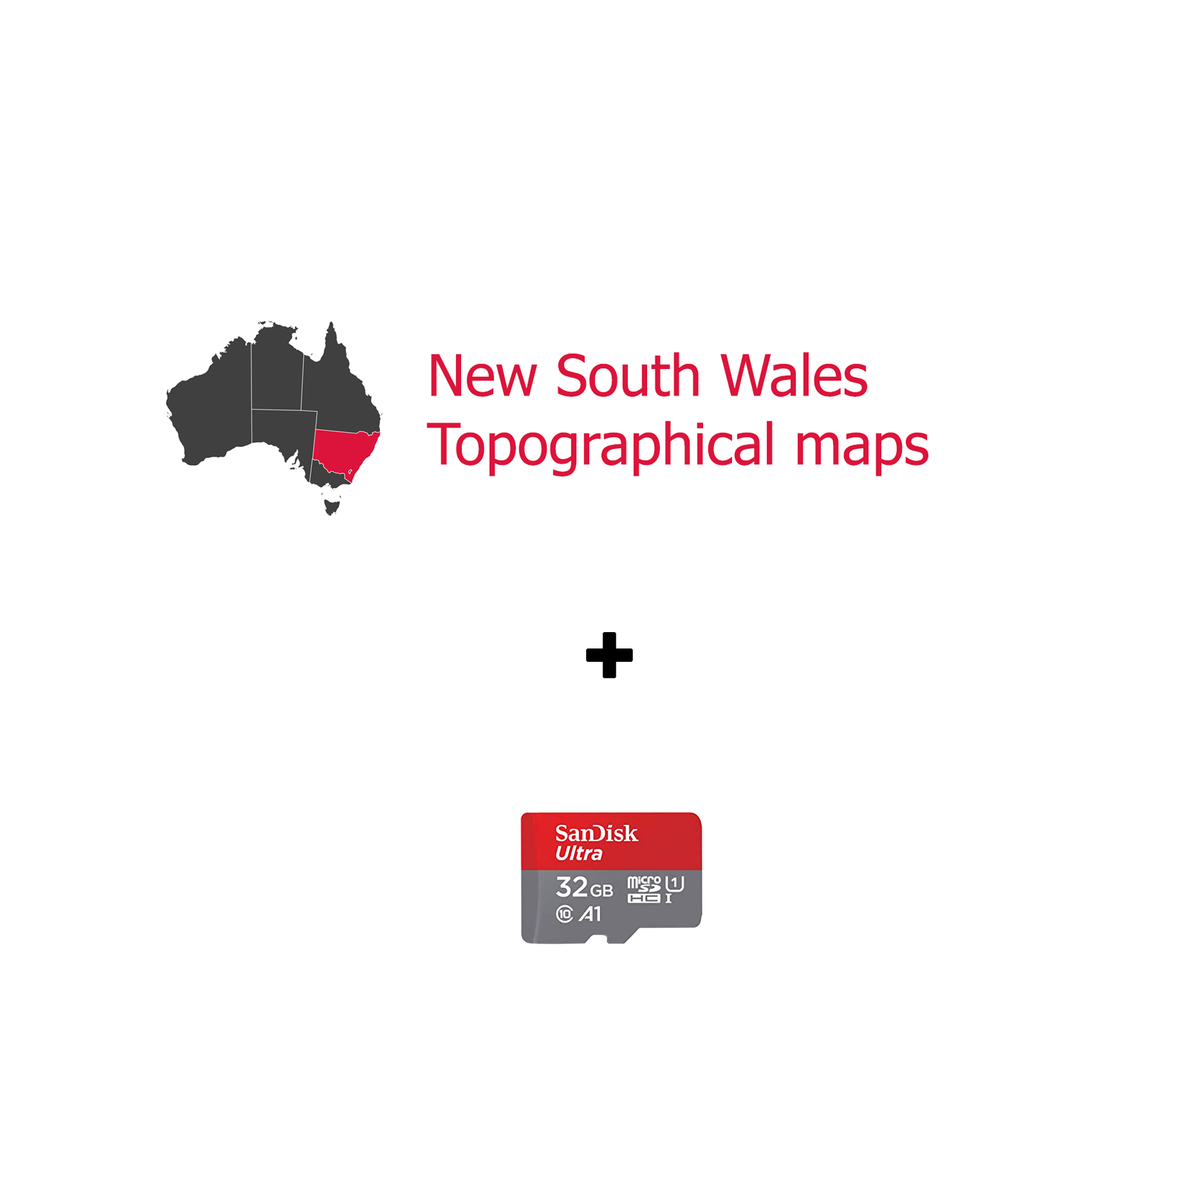 3DX New South Wales 25K Topo maps (Includes a SD card)